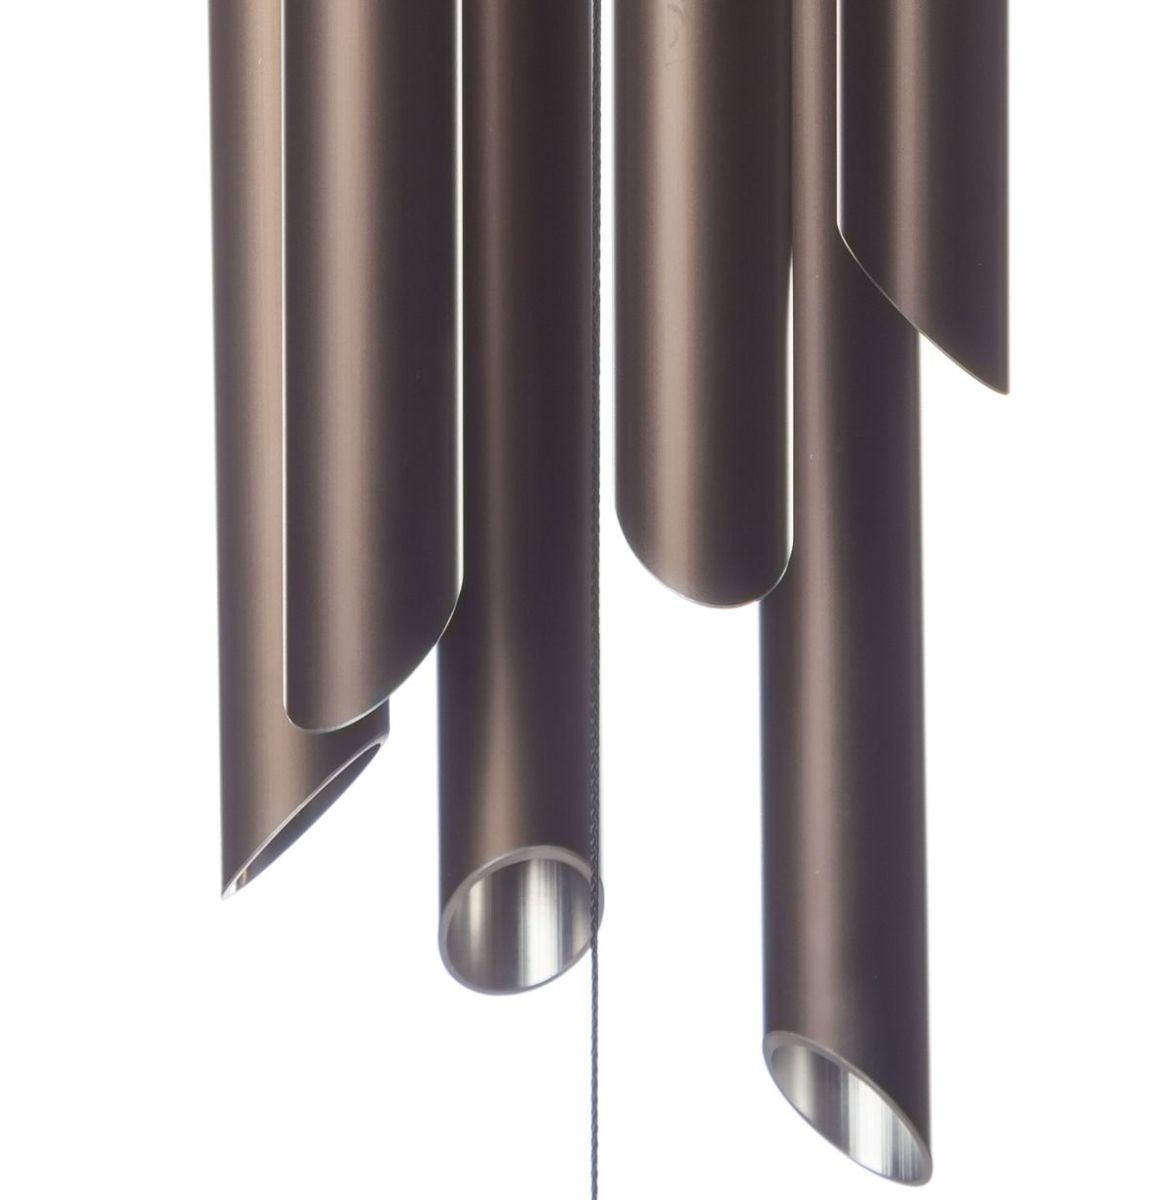 Bronze wind chime for 8th and 19th wedding anniversary